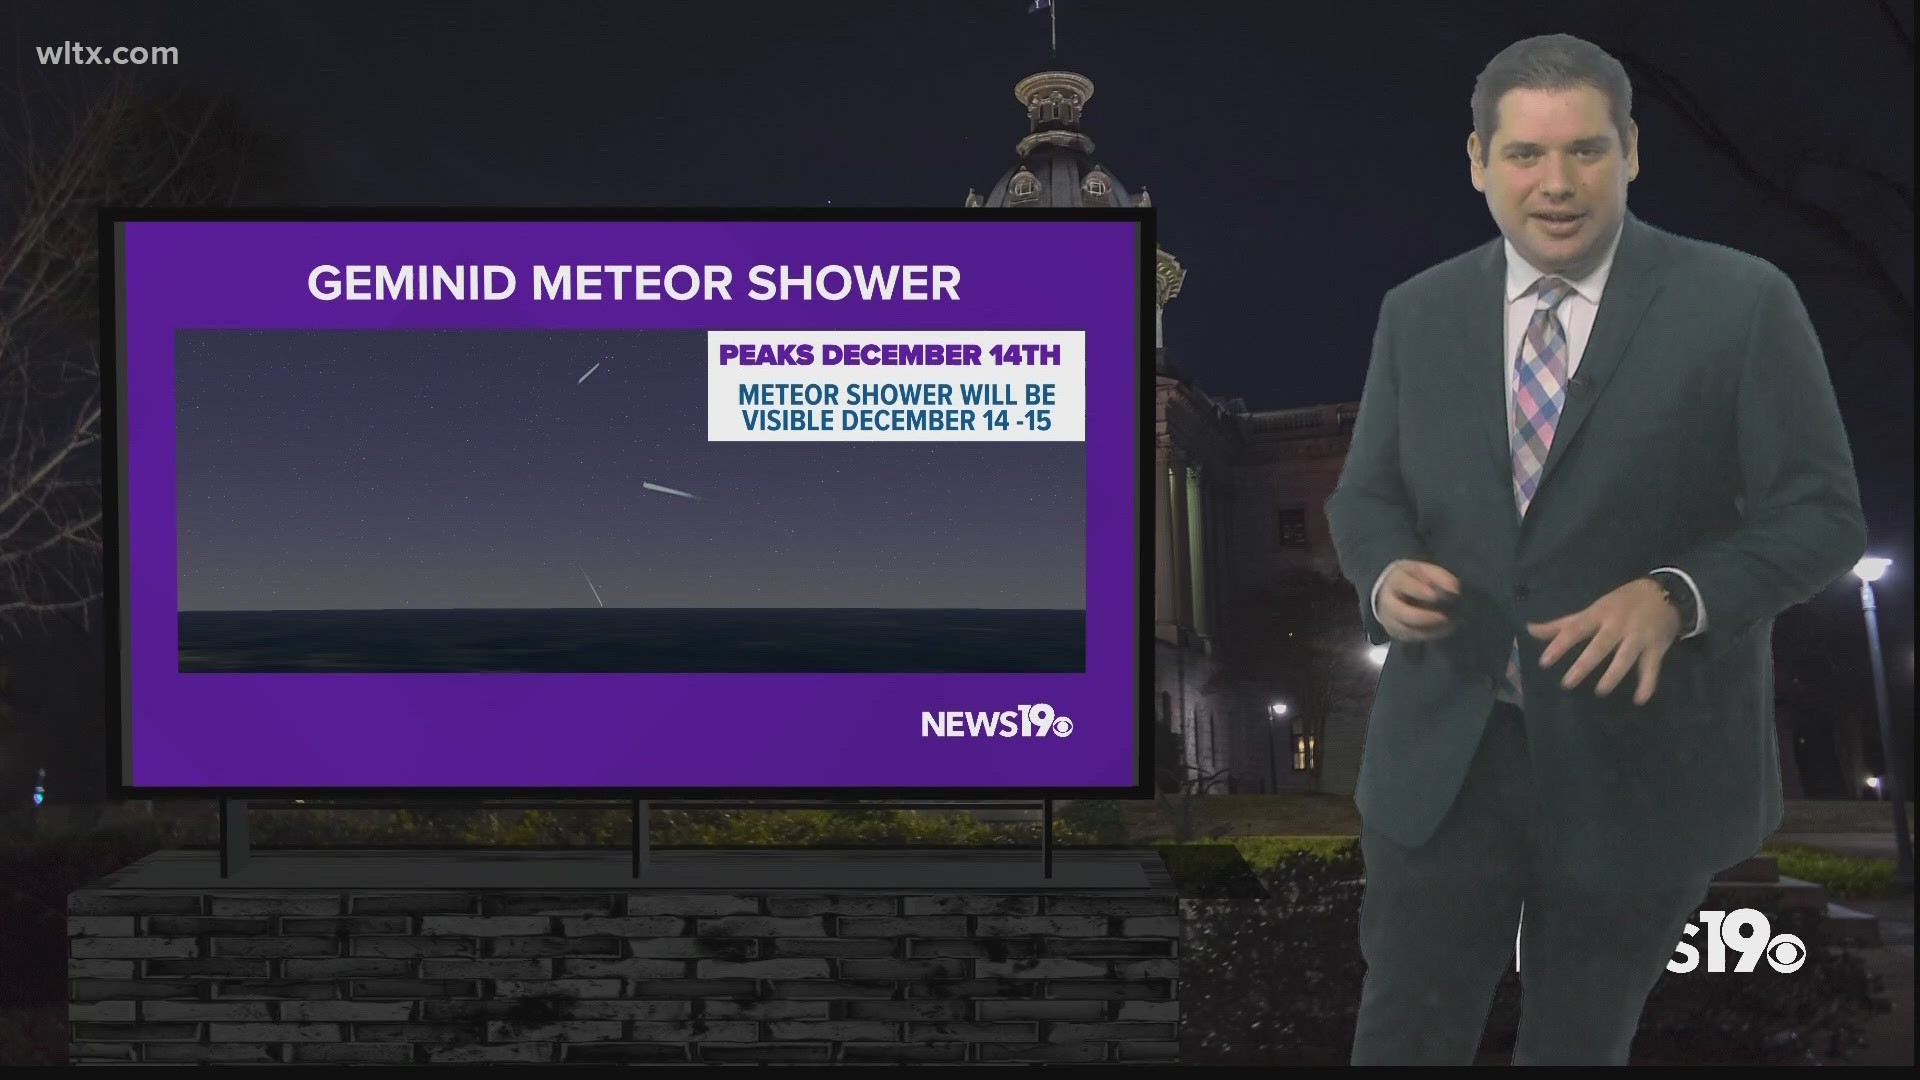 The end of the year will feature the best meteor shower of the year.